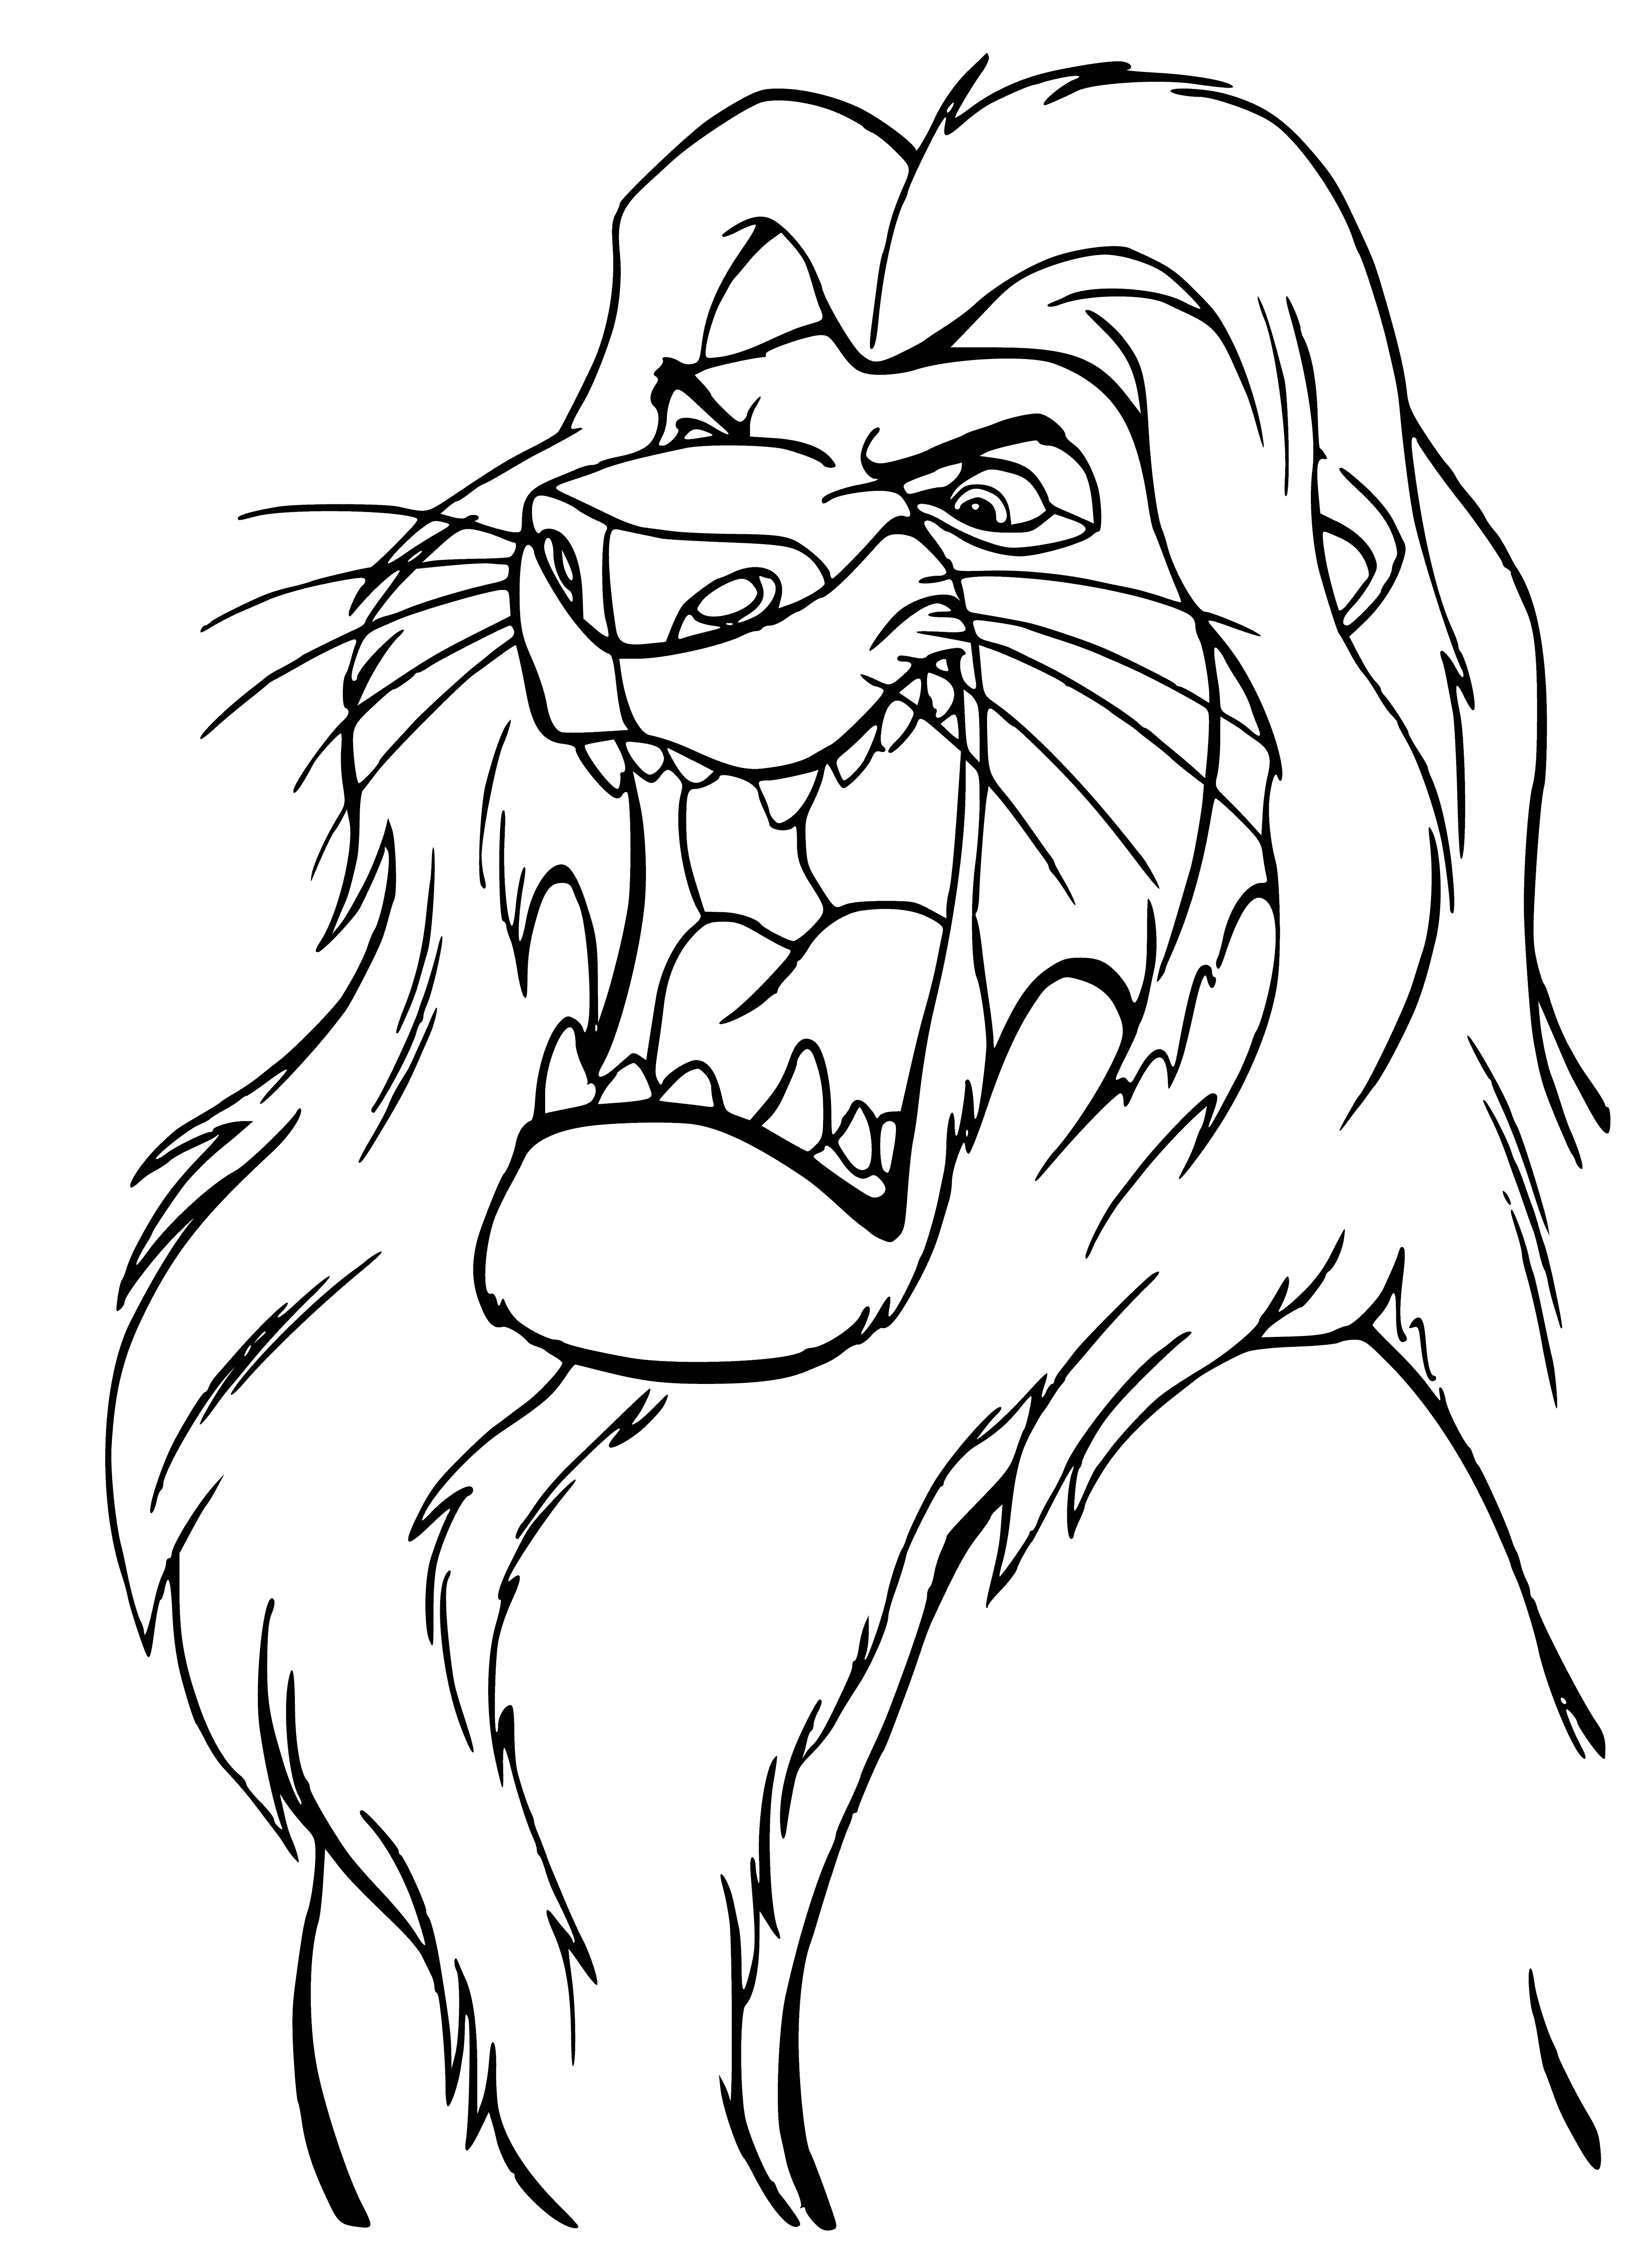 coloring page: Lion basks in sunset on rocky Cliff, revealing large teeth and light brown mane blowing in the wind. #nature #coloring pagegraphy